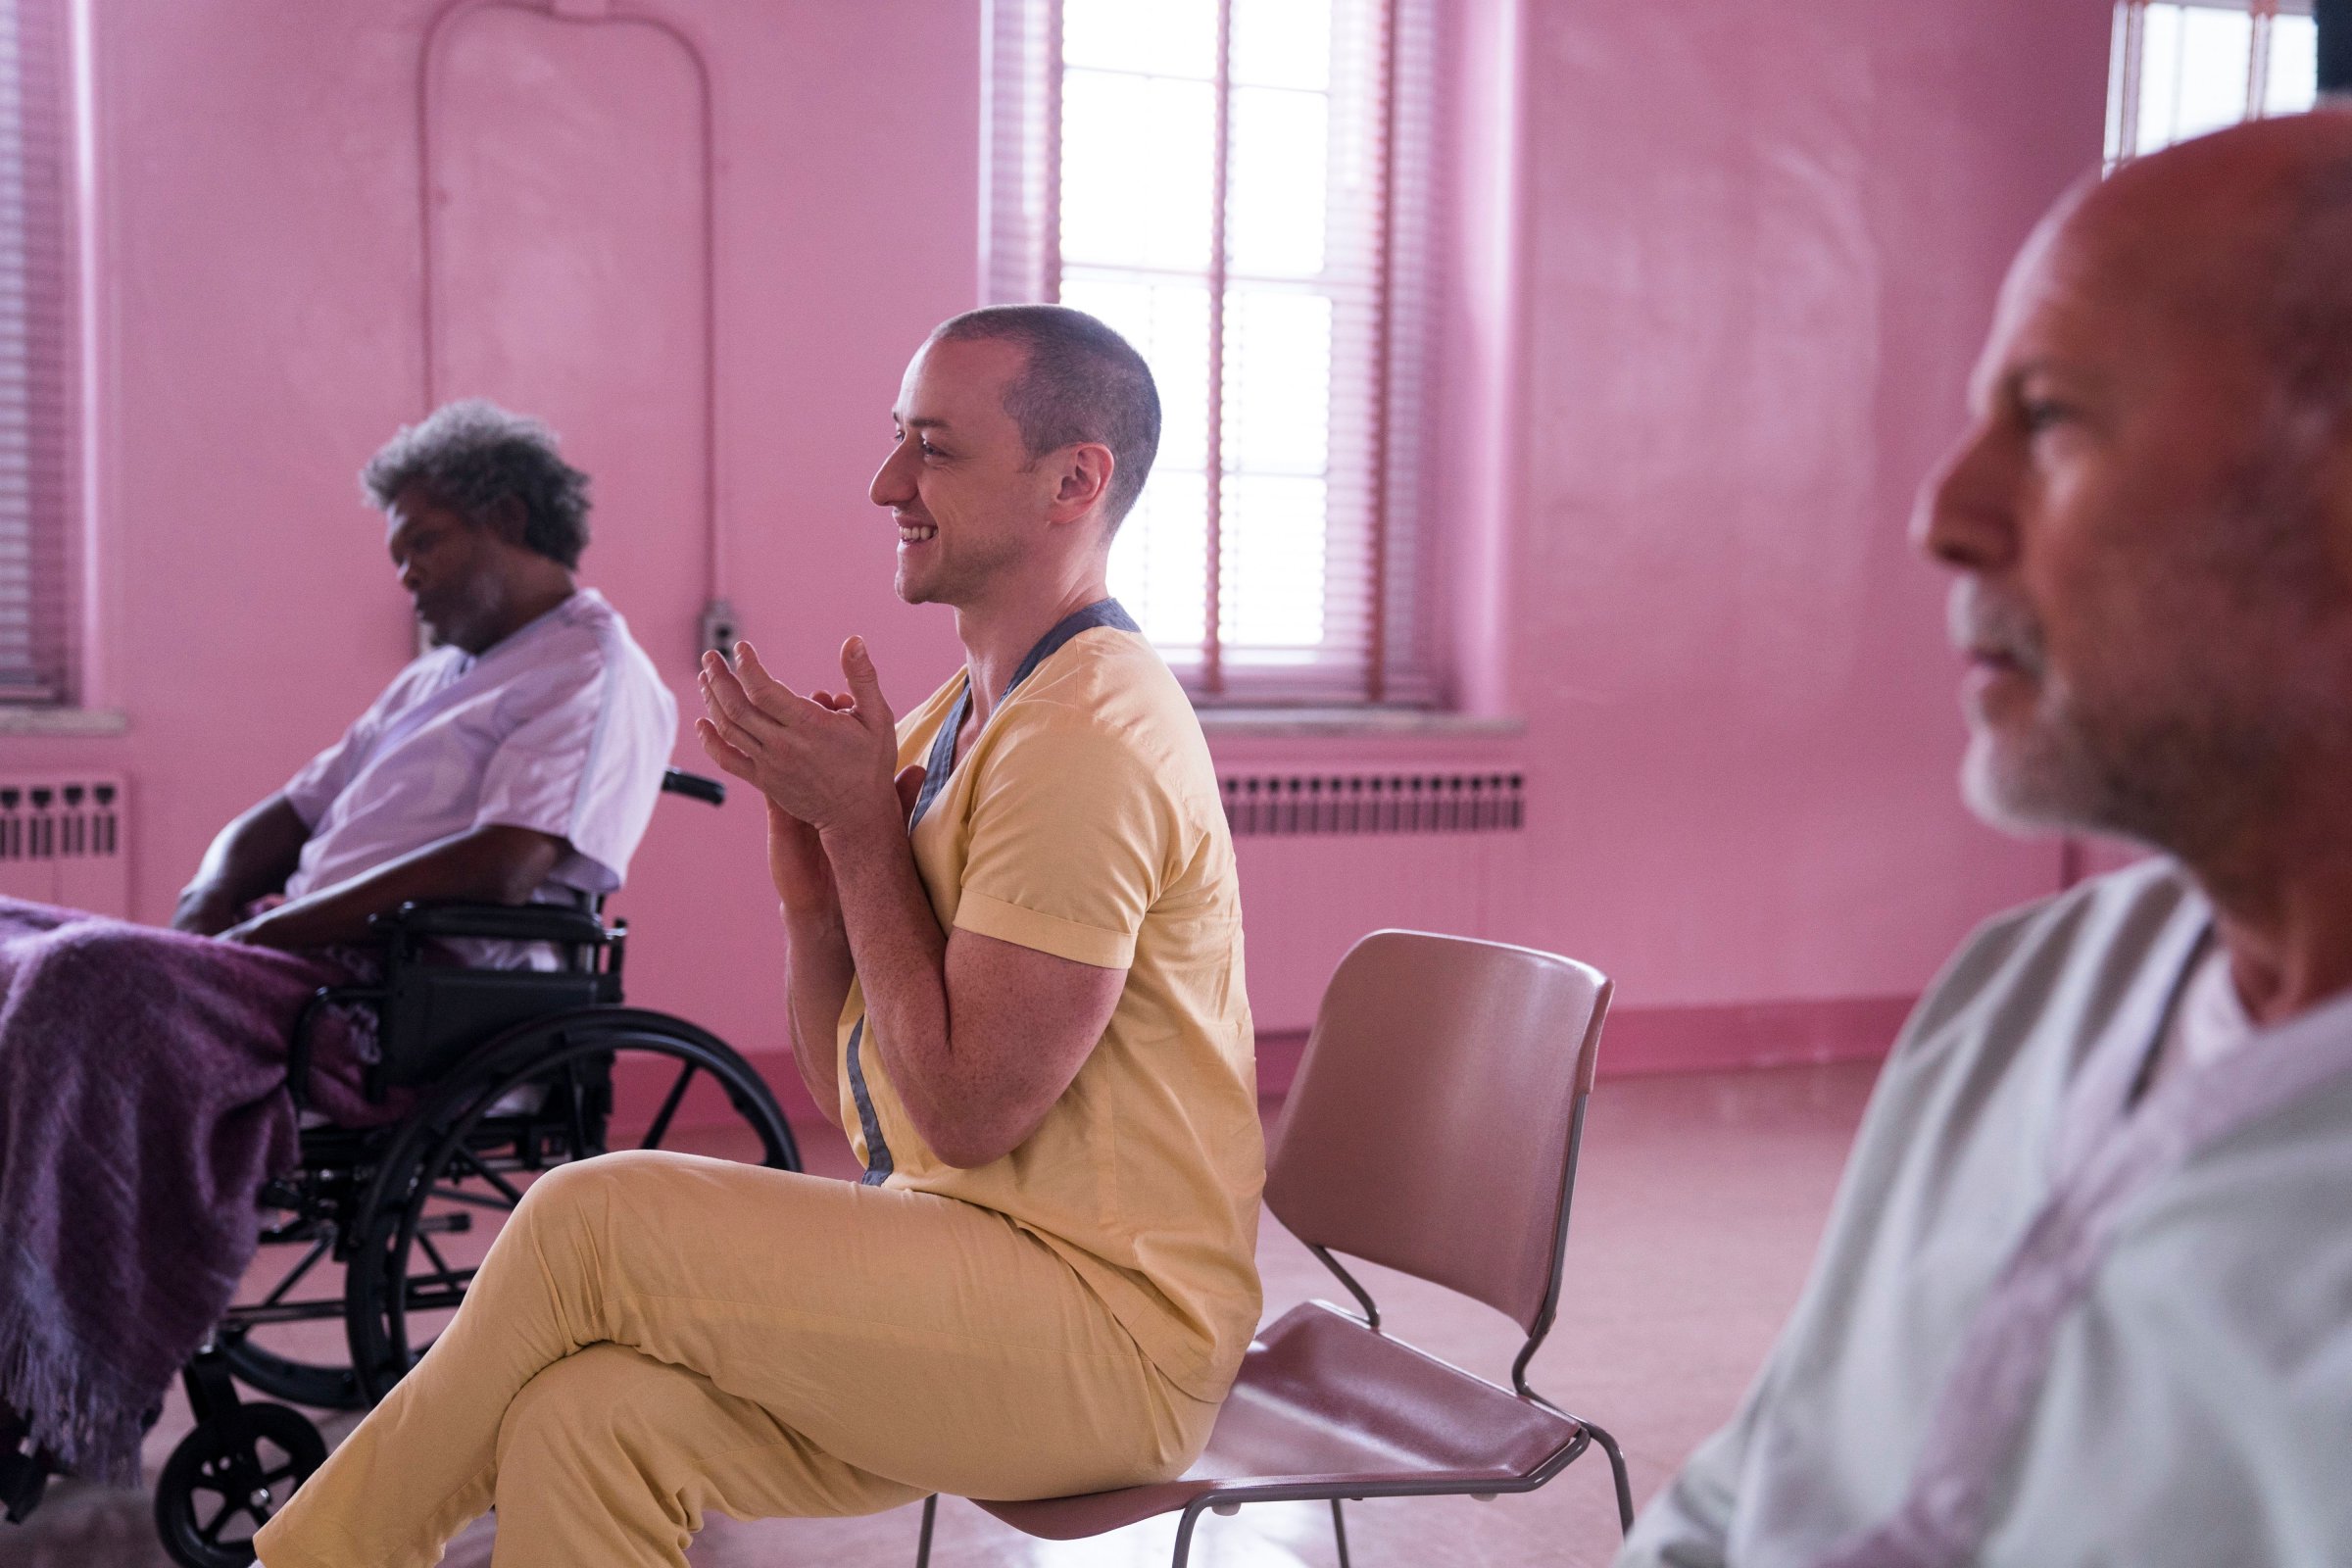 Samuel L. Jackson as Elijah Price/Mr. Glass, James McAvoy as Kevin Wendell Crumb/The Horde, and Bruce Willis as David in 'Glass'